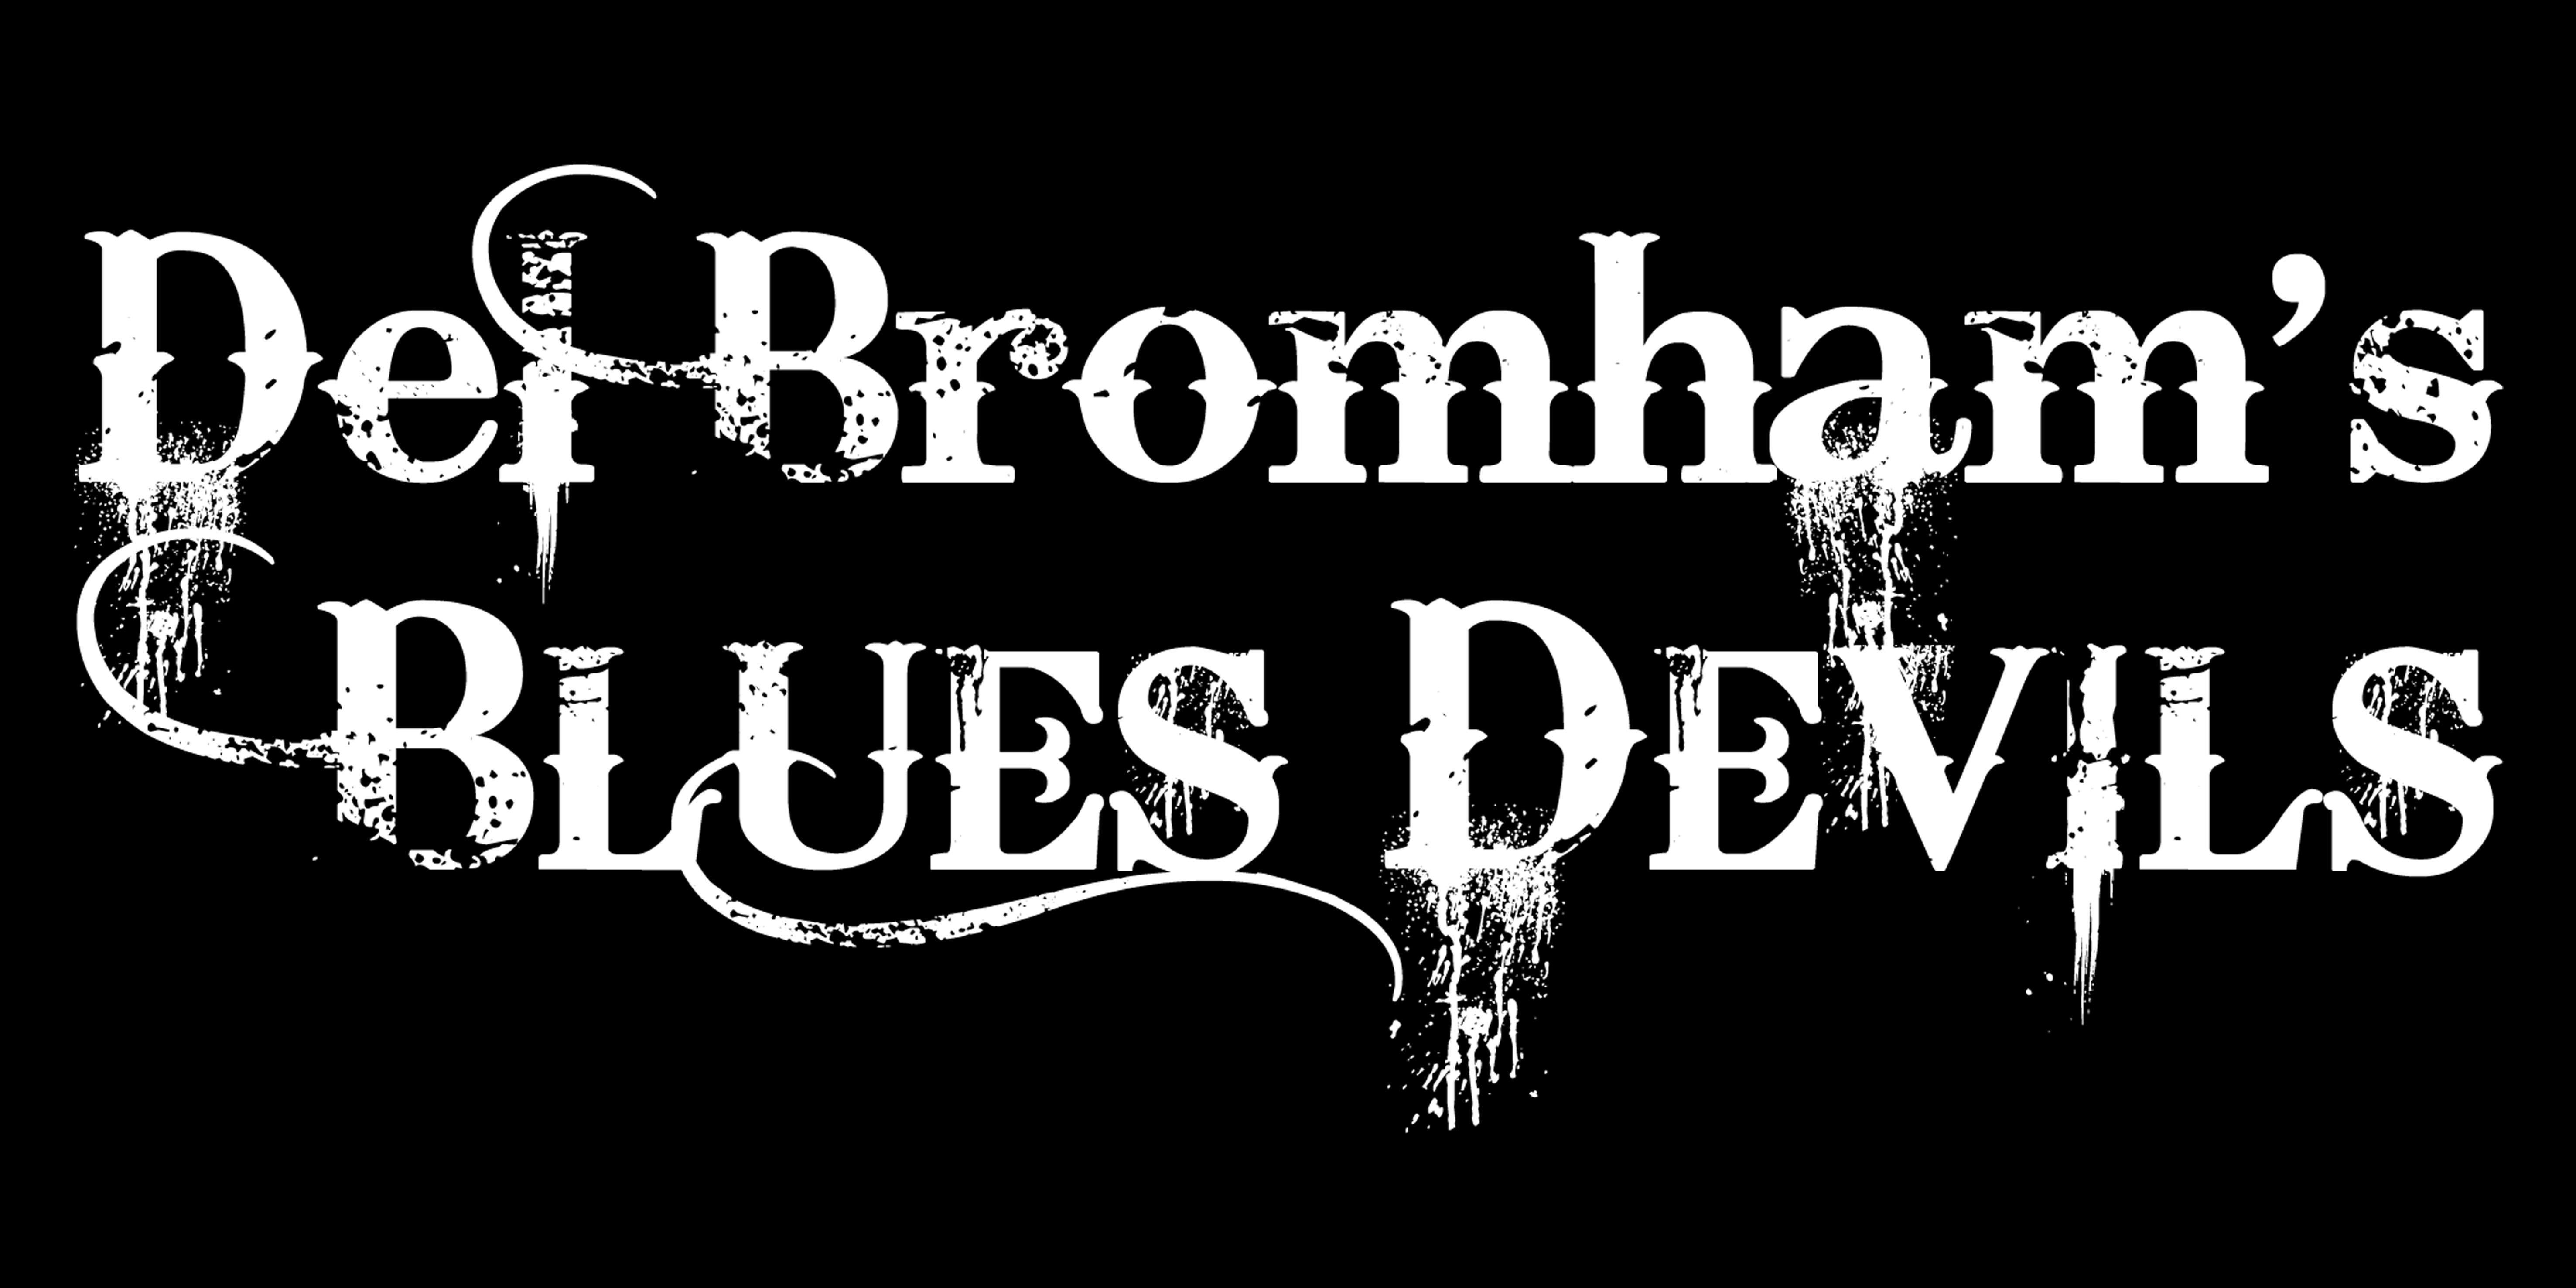 Blues with White Line Logo - Cheese and Grain. Del Bromham's Blues Devils